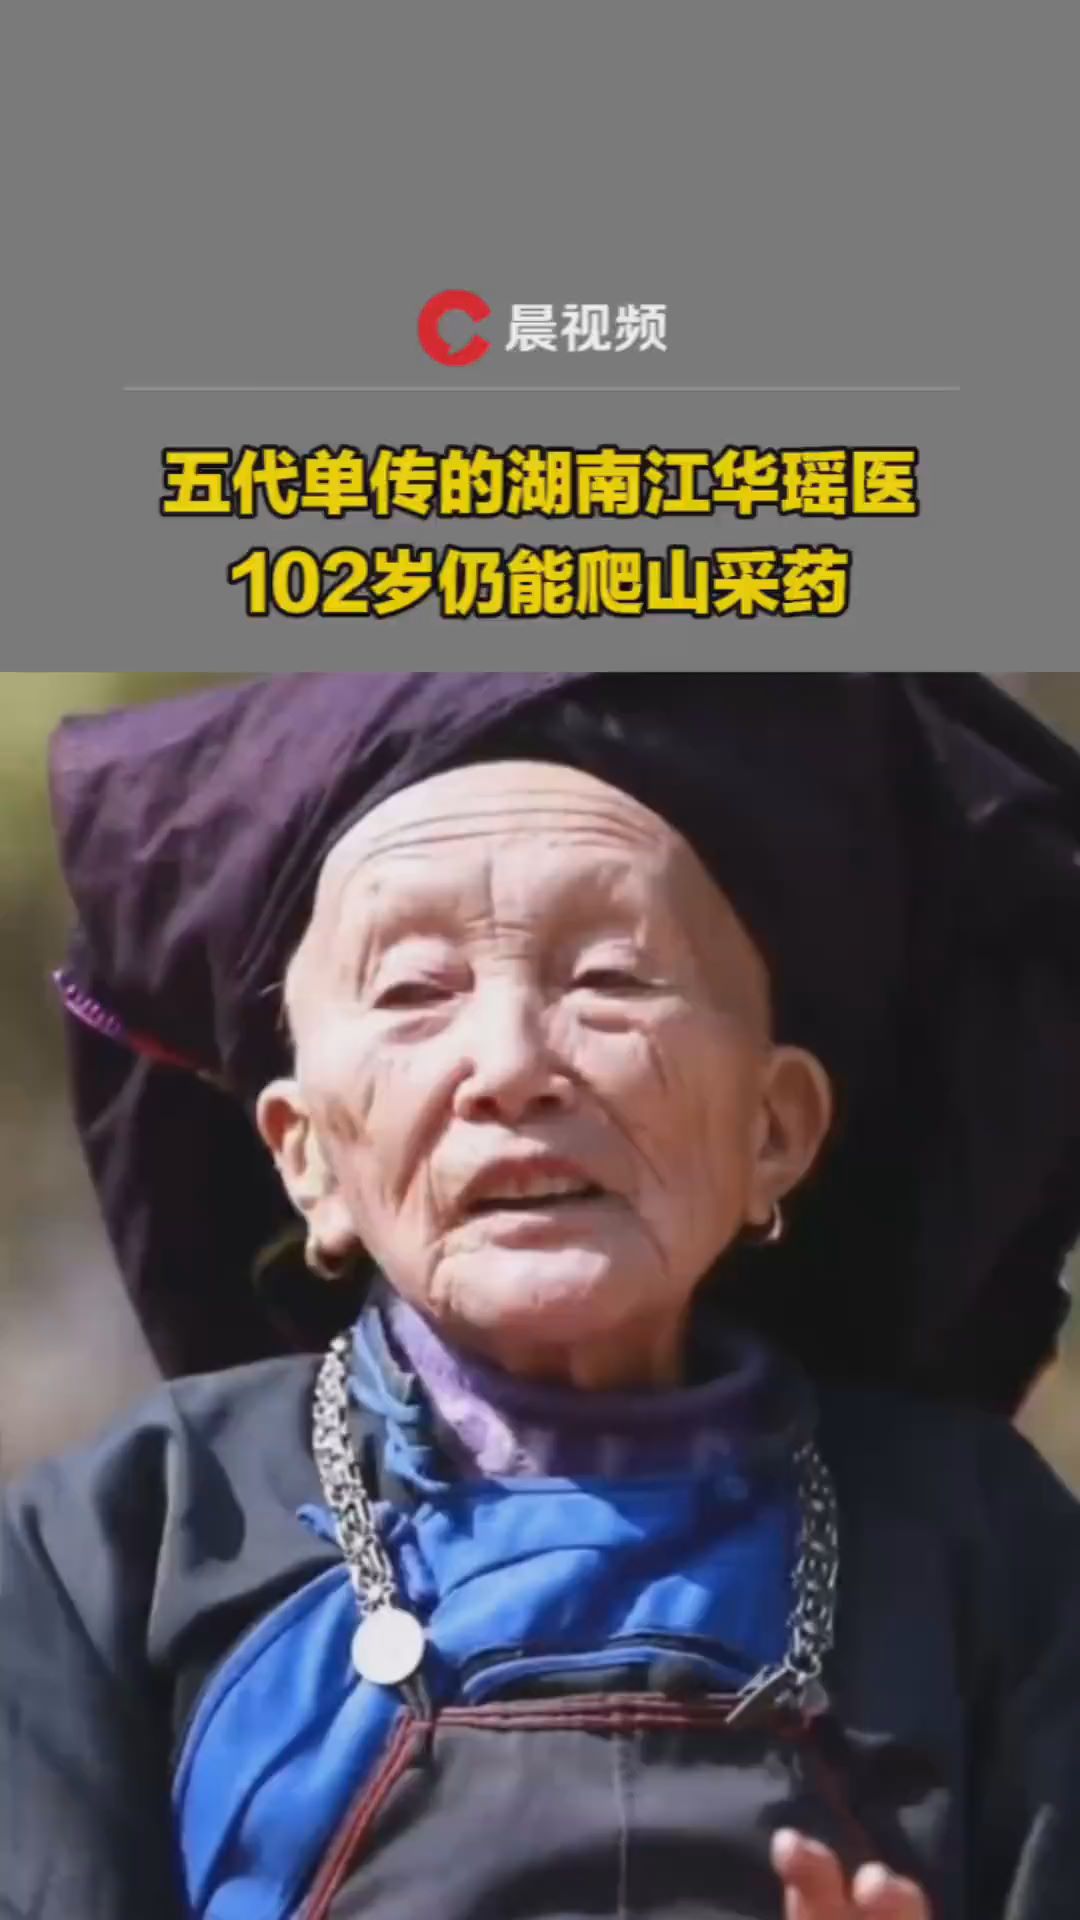  A single Yao doctor of the Five Dynasties still climbs mountains to collect herbs at the age of 102